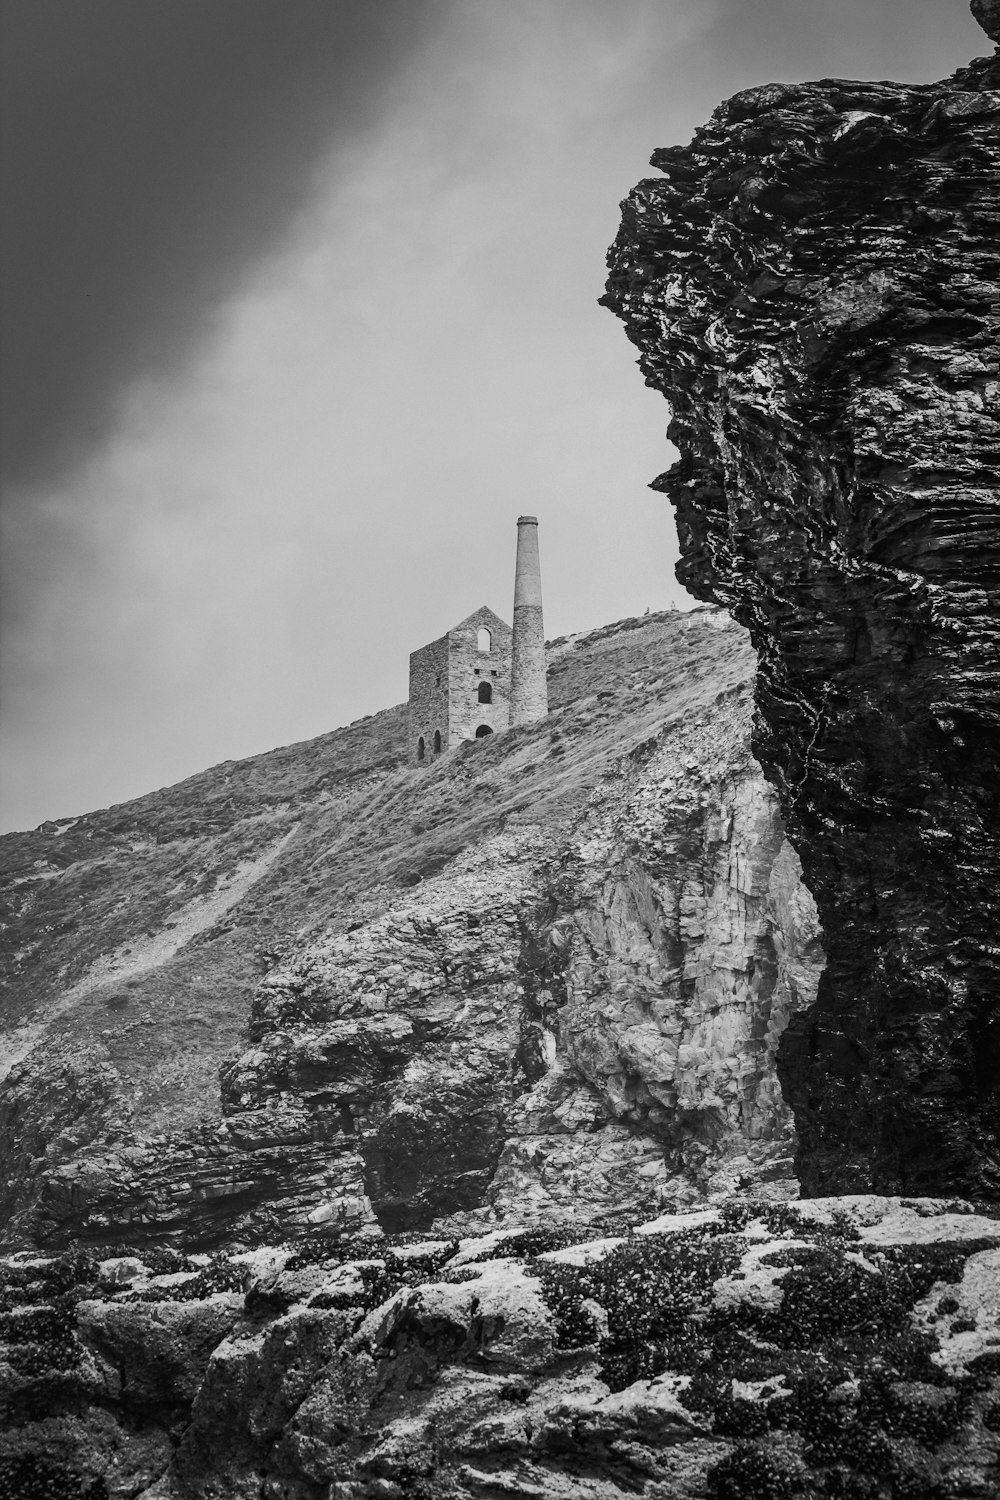 grayscale photography of house on hill near big rock formation